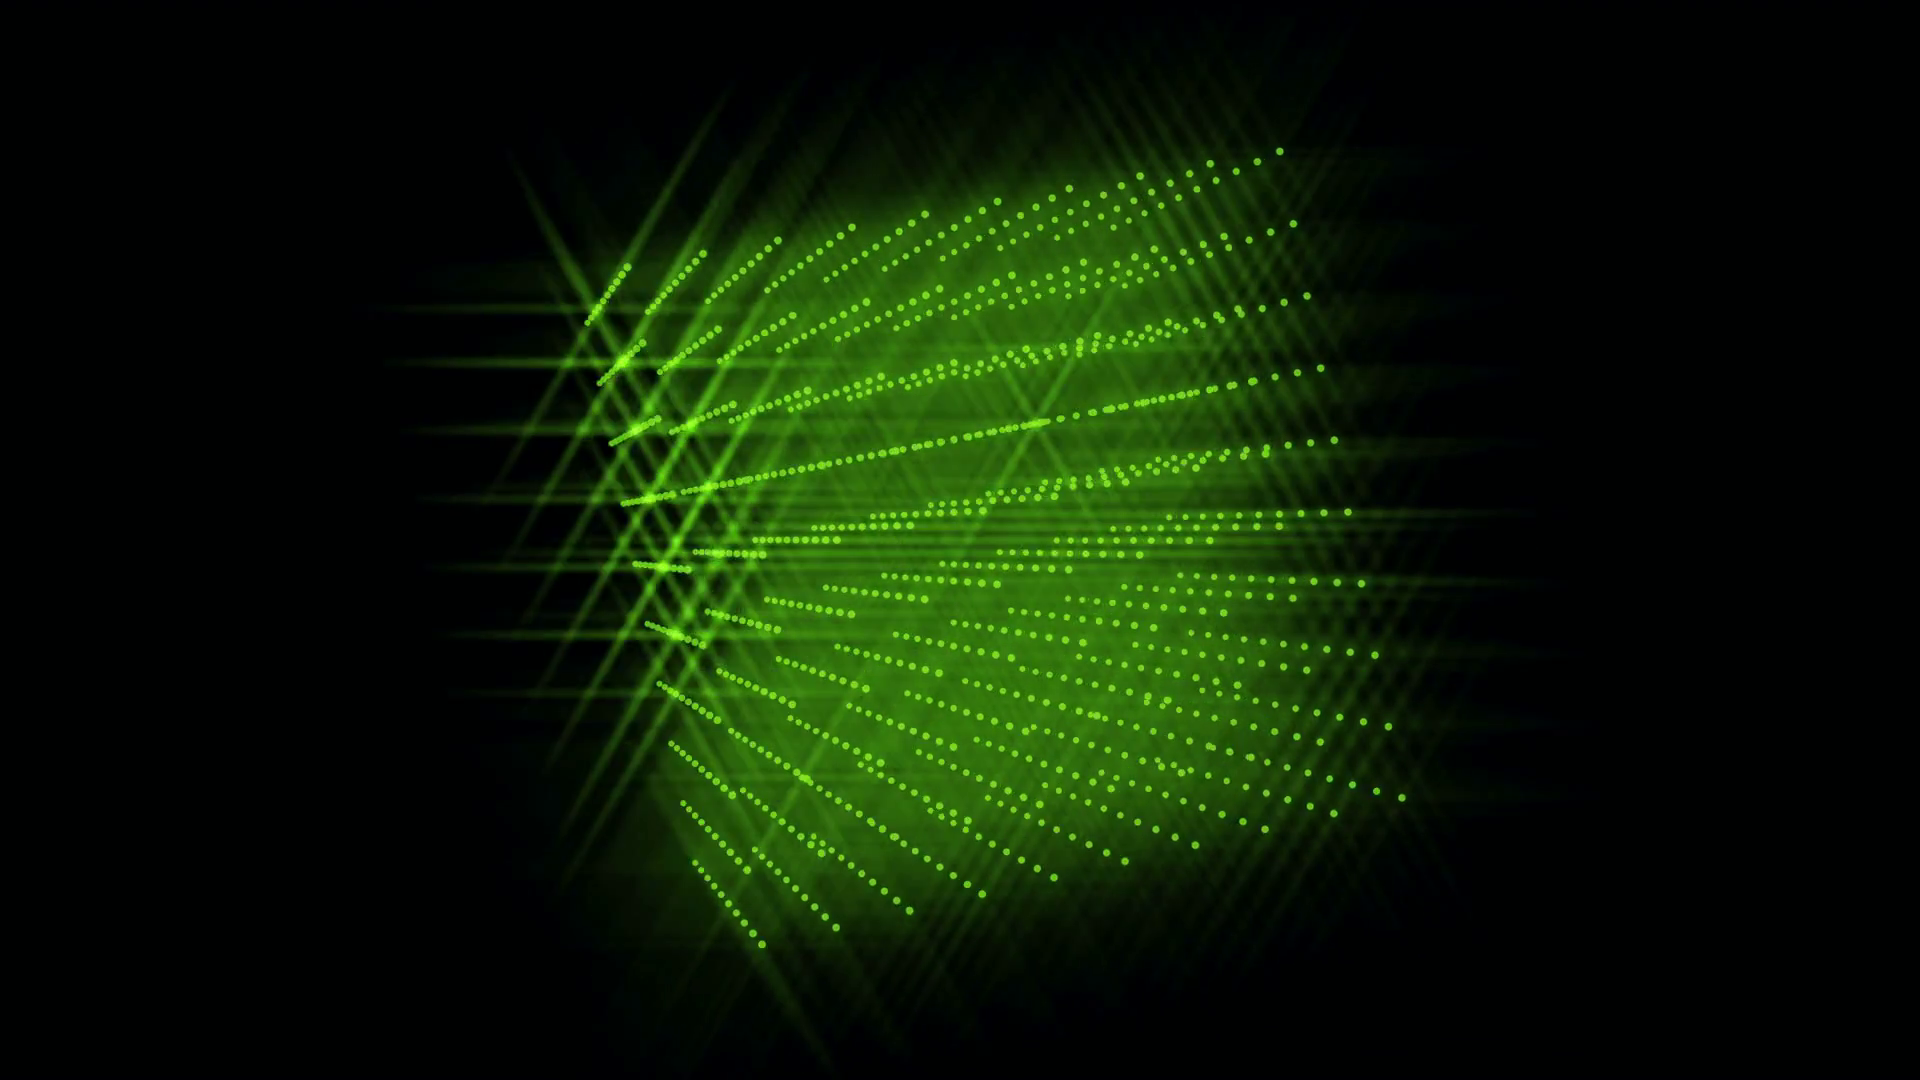 3d Cube Of Green Glowing Particles Rotating On A Diagonal